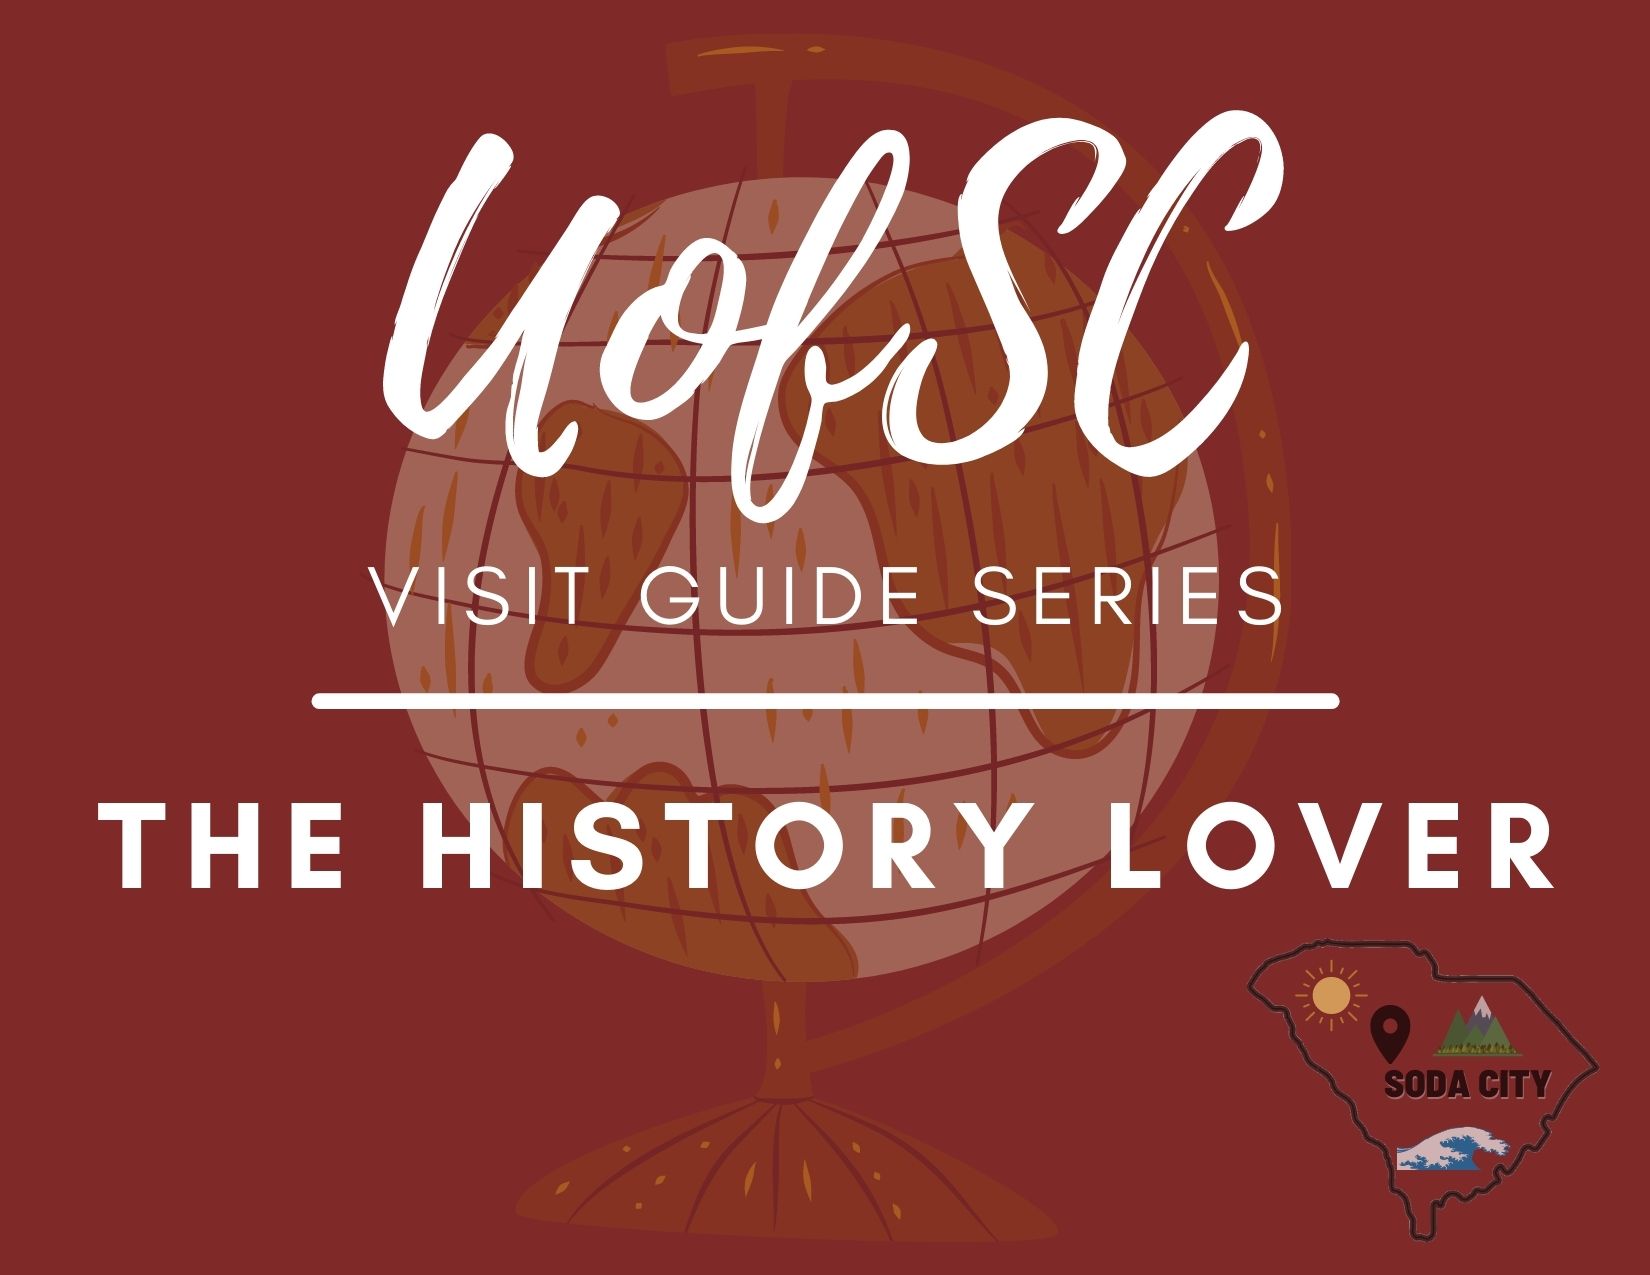 UofSC Visit Guide Series The History Lover